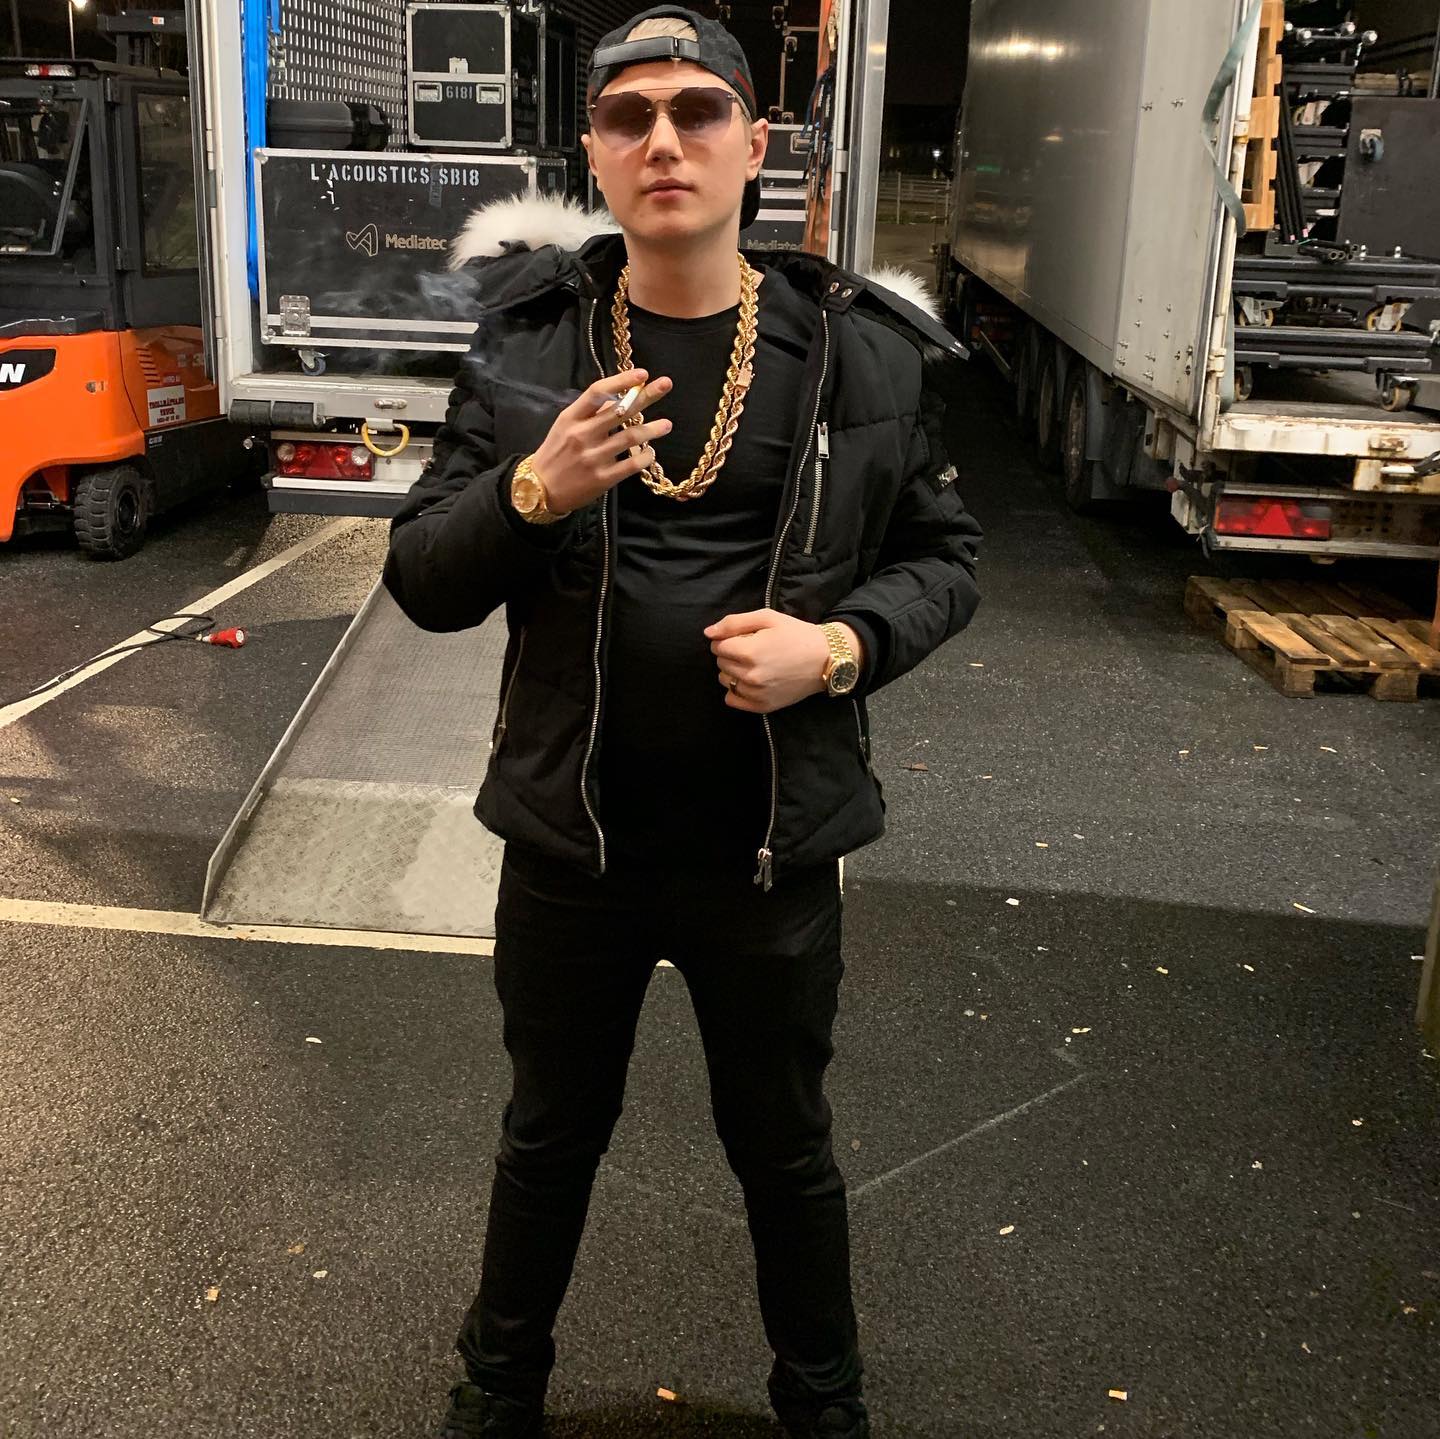 Einar wearing black colored clothes and holding a cigarette in his hand.